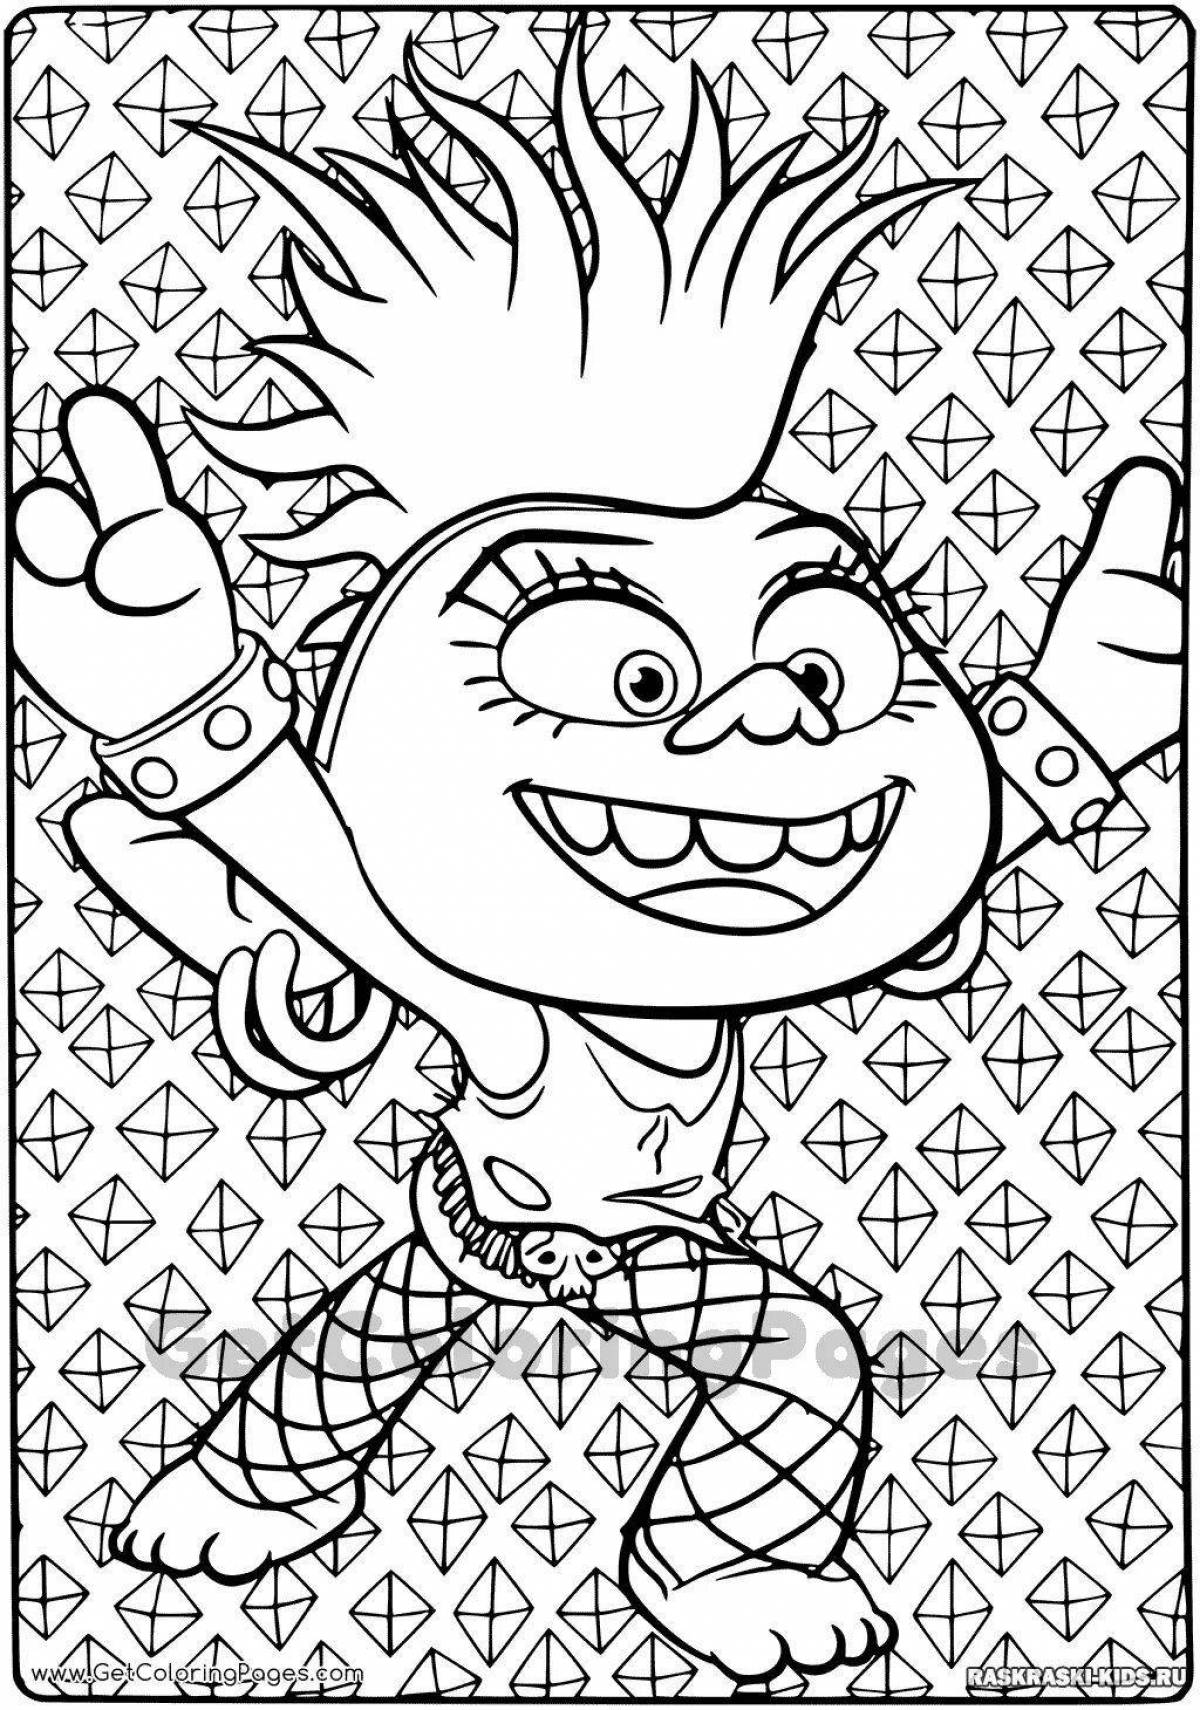 Awesome rock trolls coloring pages